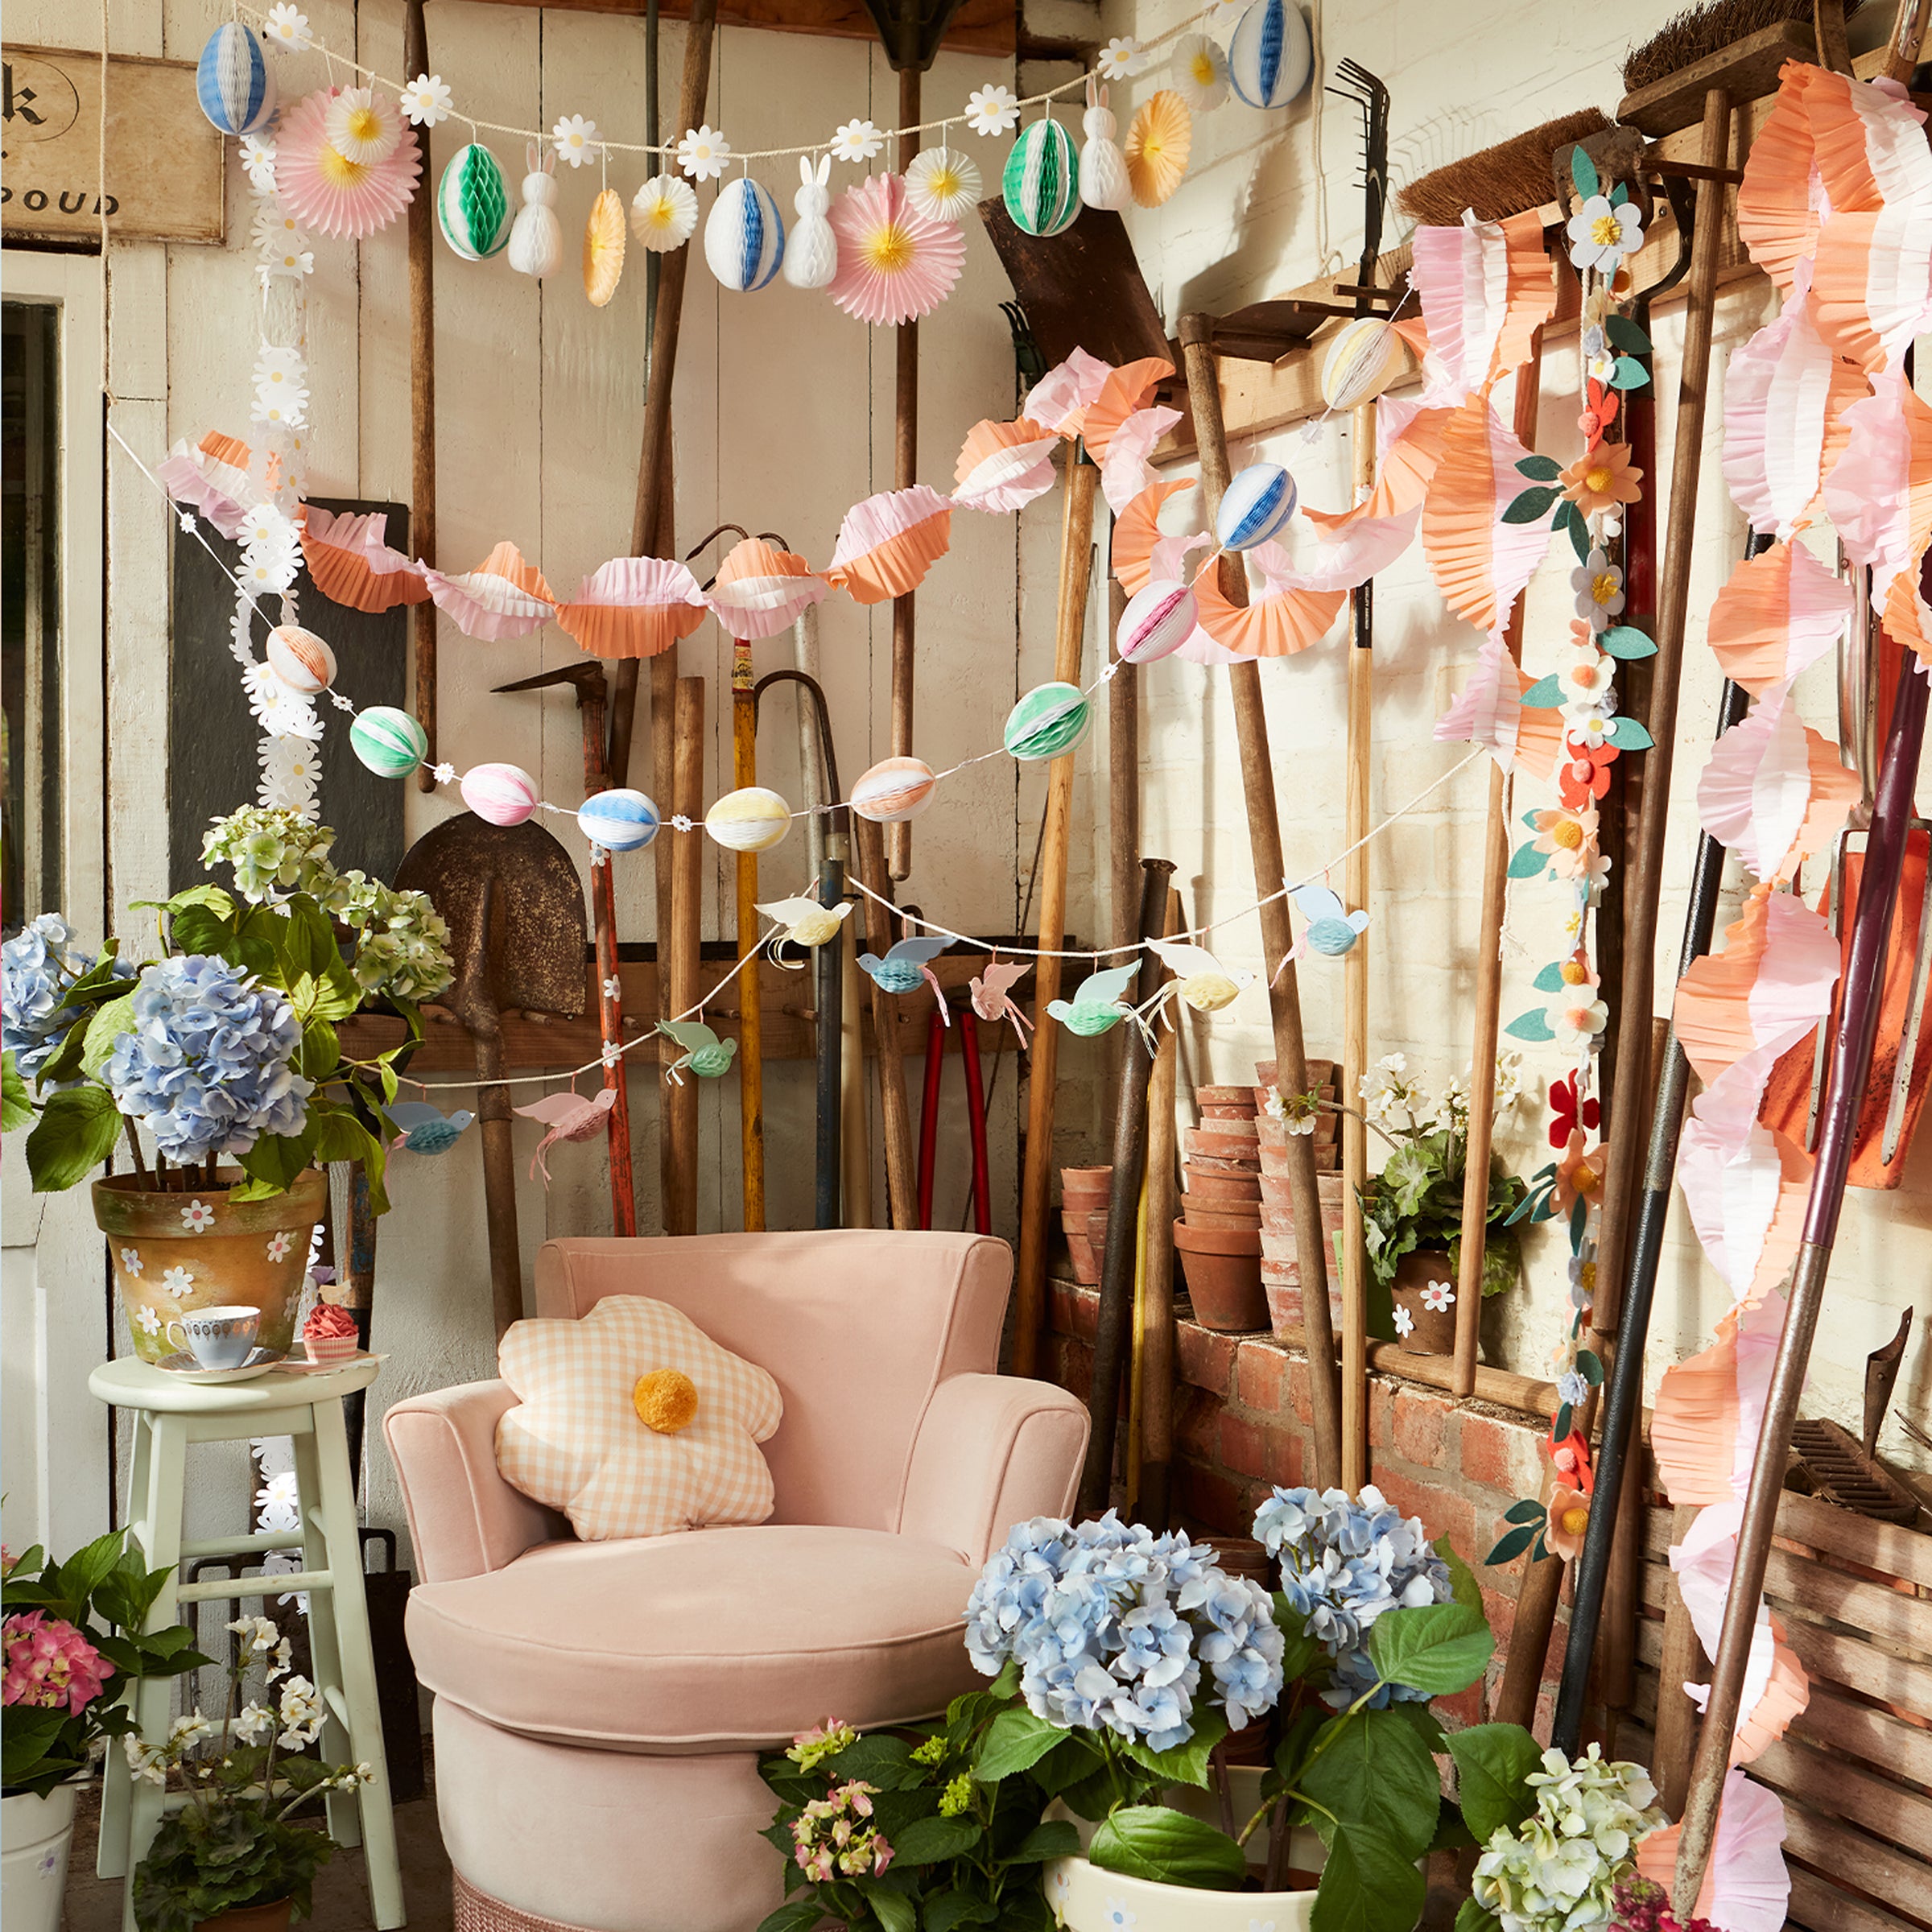 For a decorative Easter go no further than our honeycomb garland with striped Easter eggs and daisy decorations.